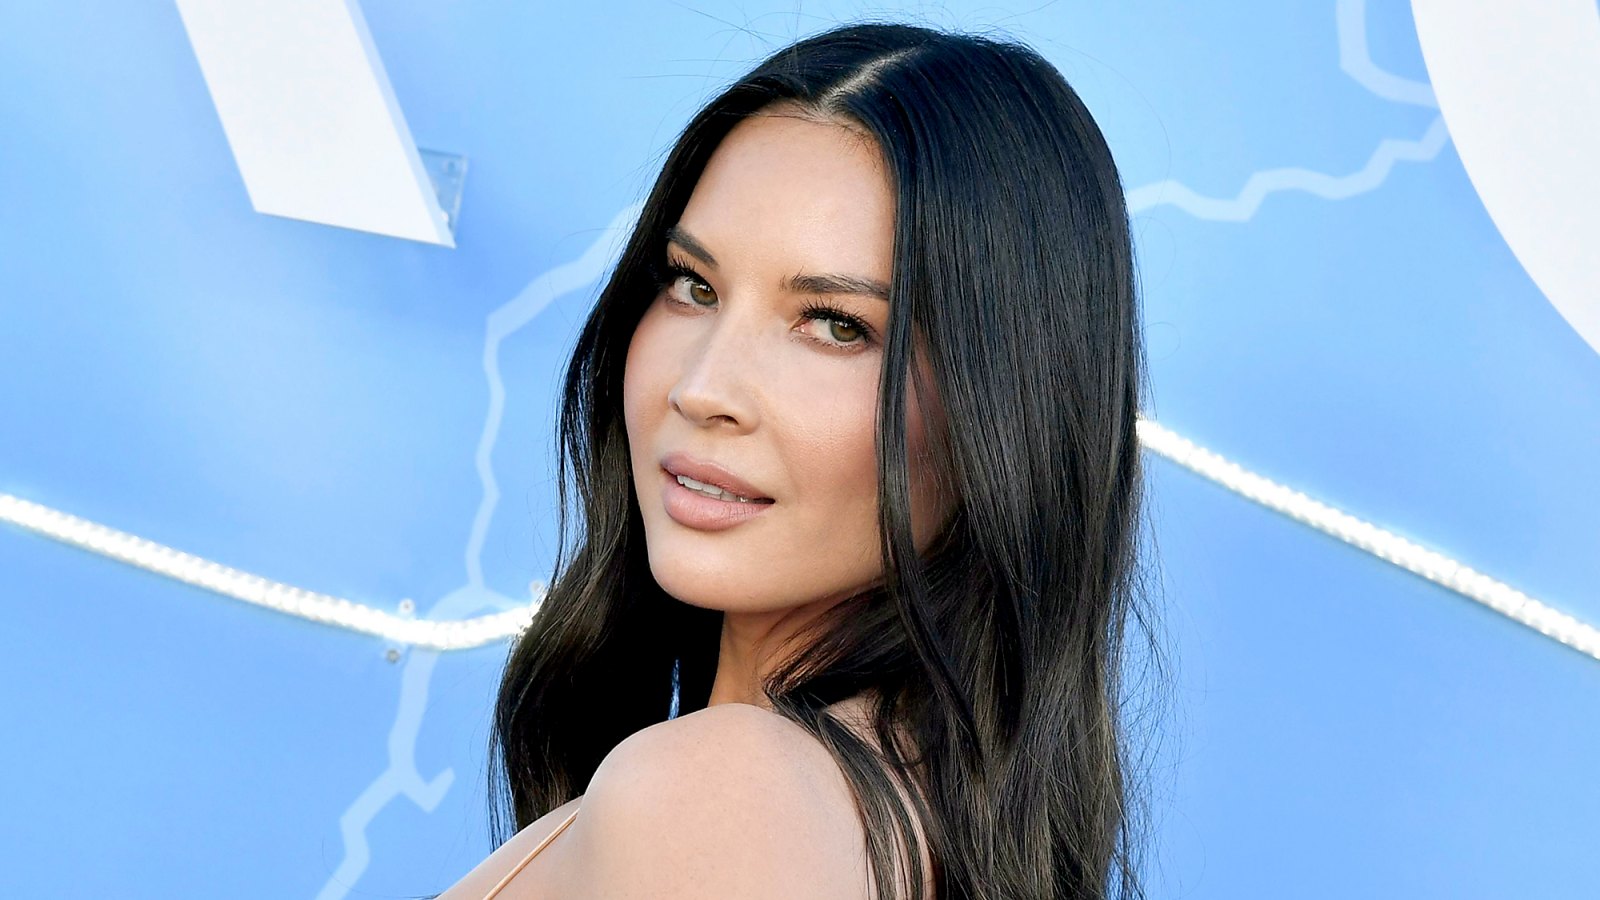 Olivia-Munn-Has-Best-Response-for-Her-Cellulite-Photo-Haters